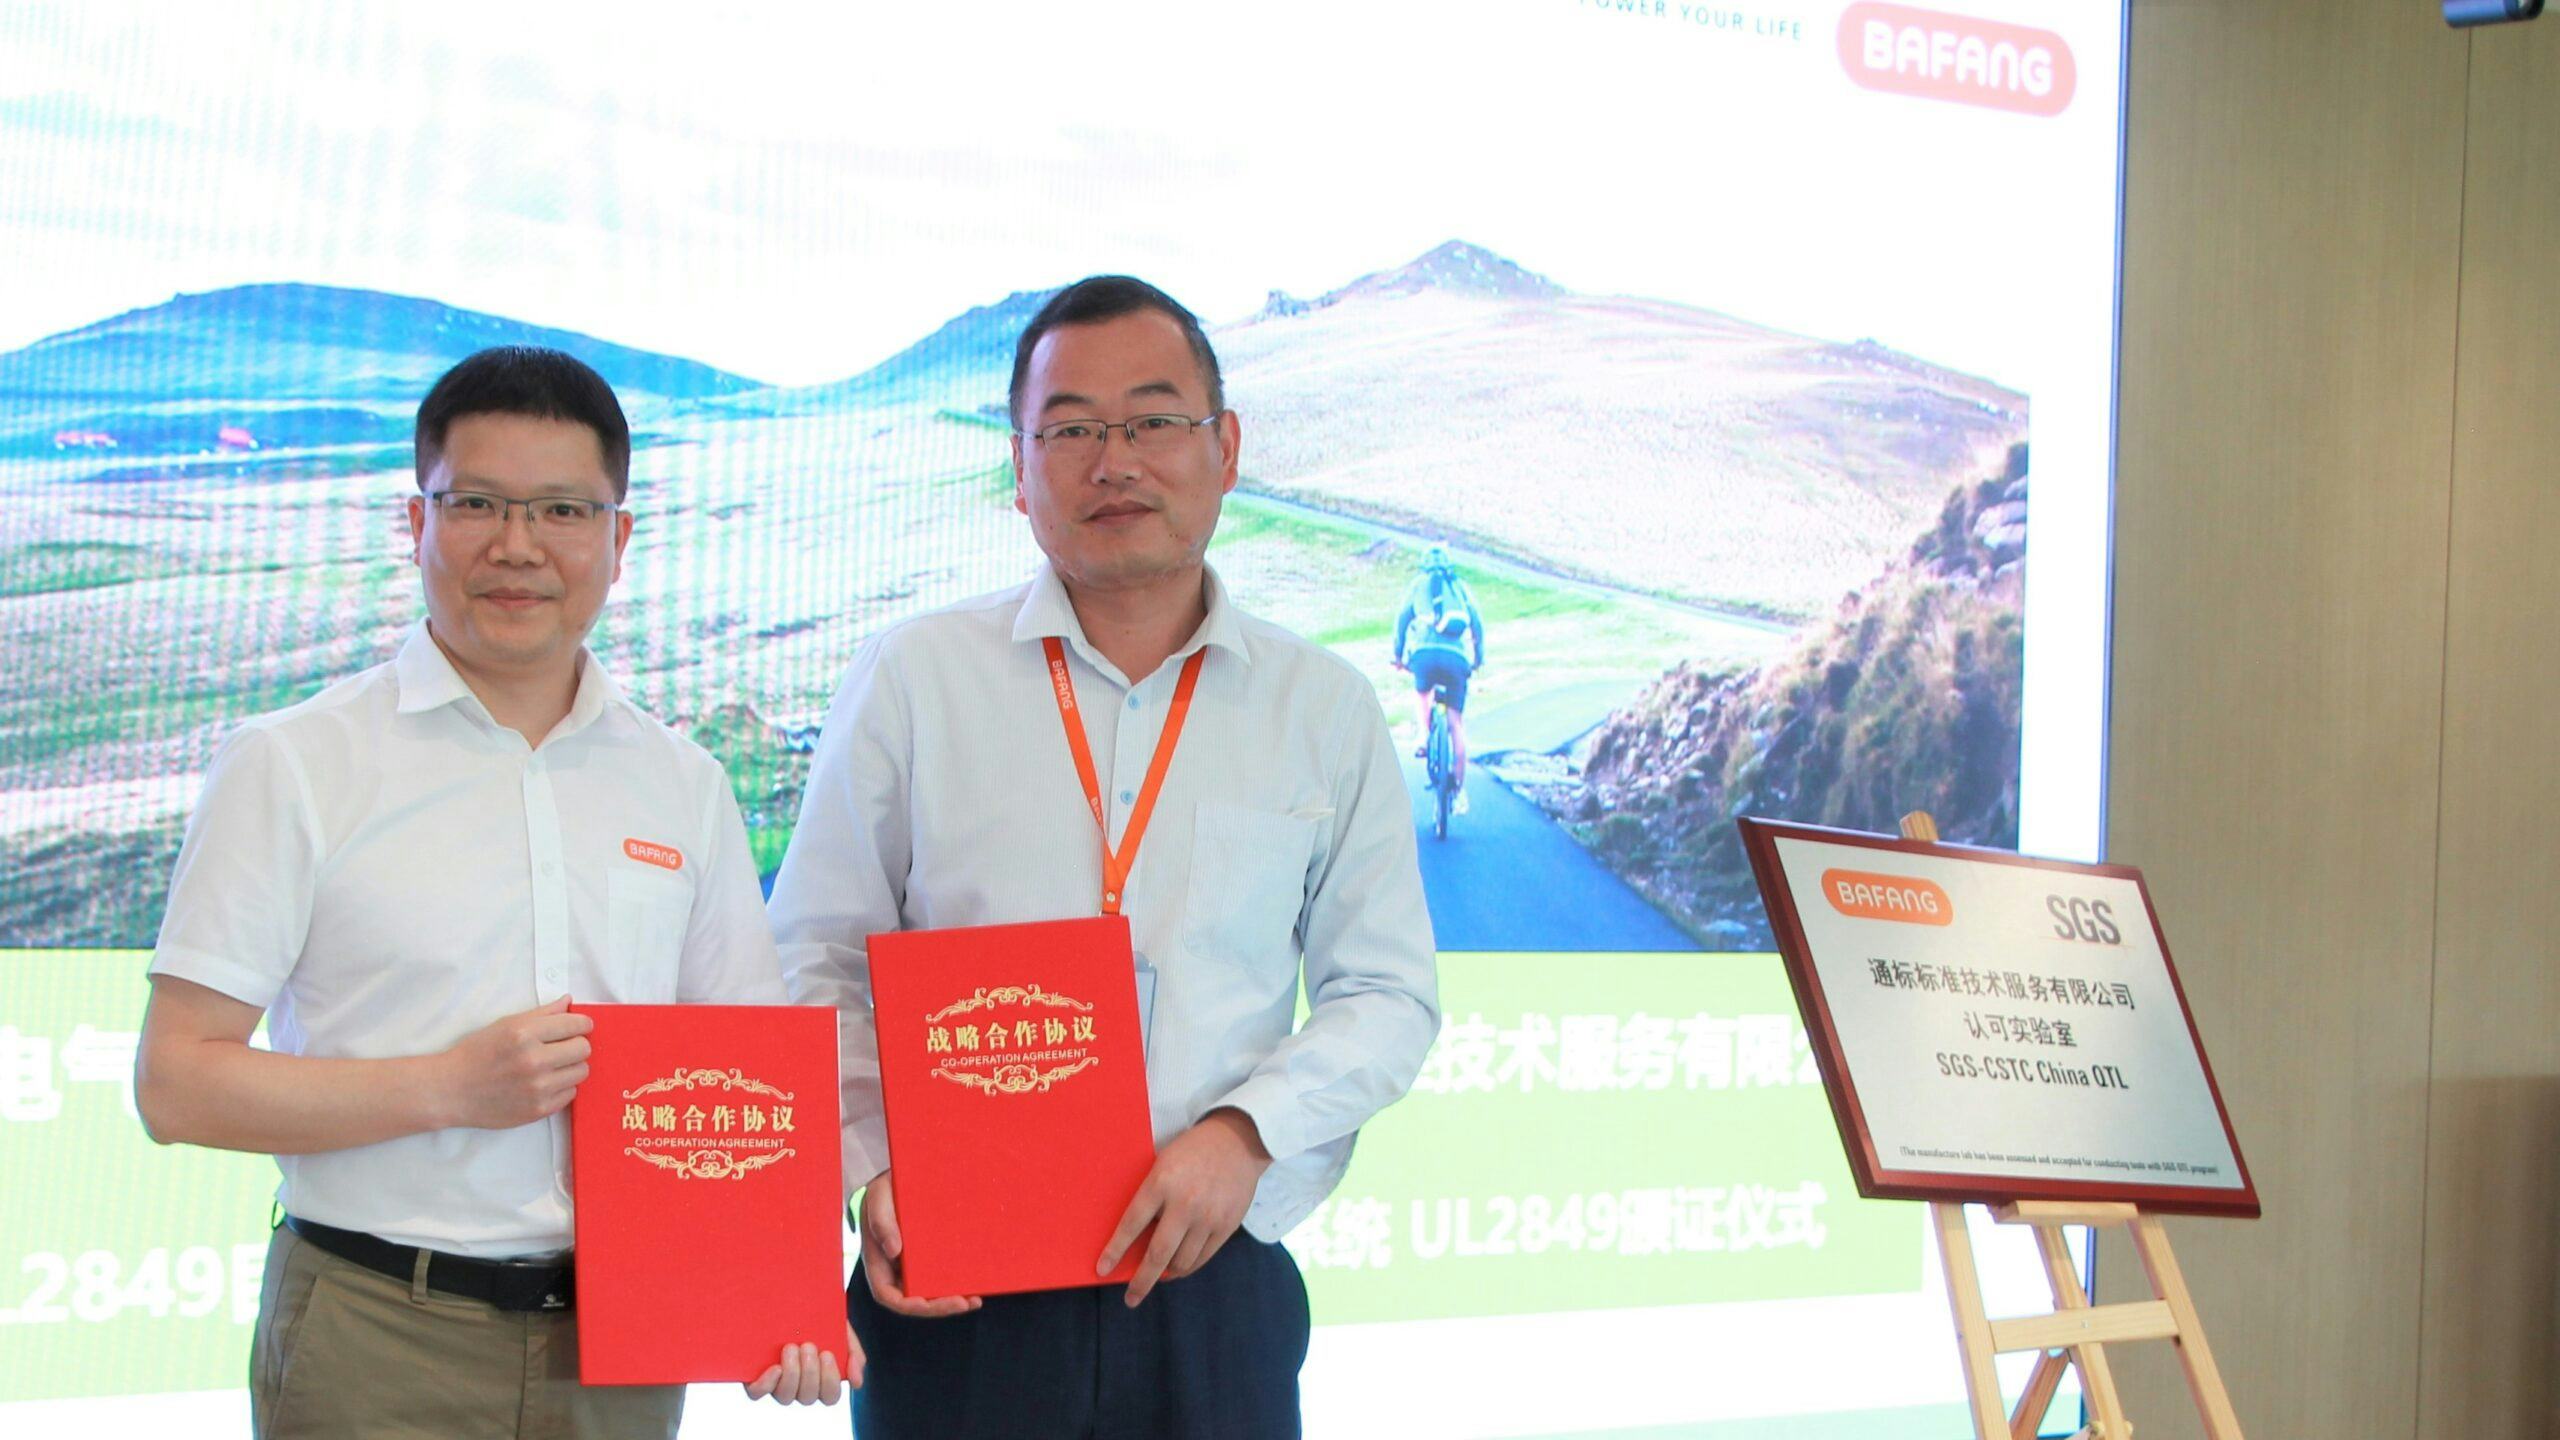 Bafang Quality Center Director Wen Xinge (l.) and SGS East China Laboratory Manager Zhang Zhigang (r) at the certification award ceremony. – Photo Bafang